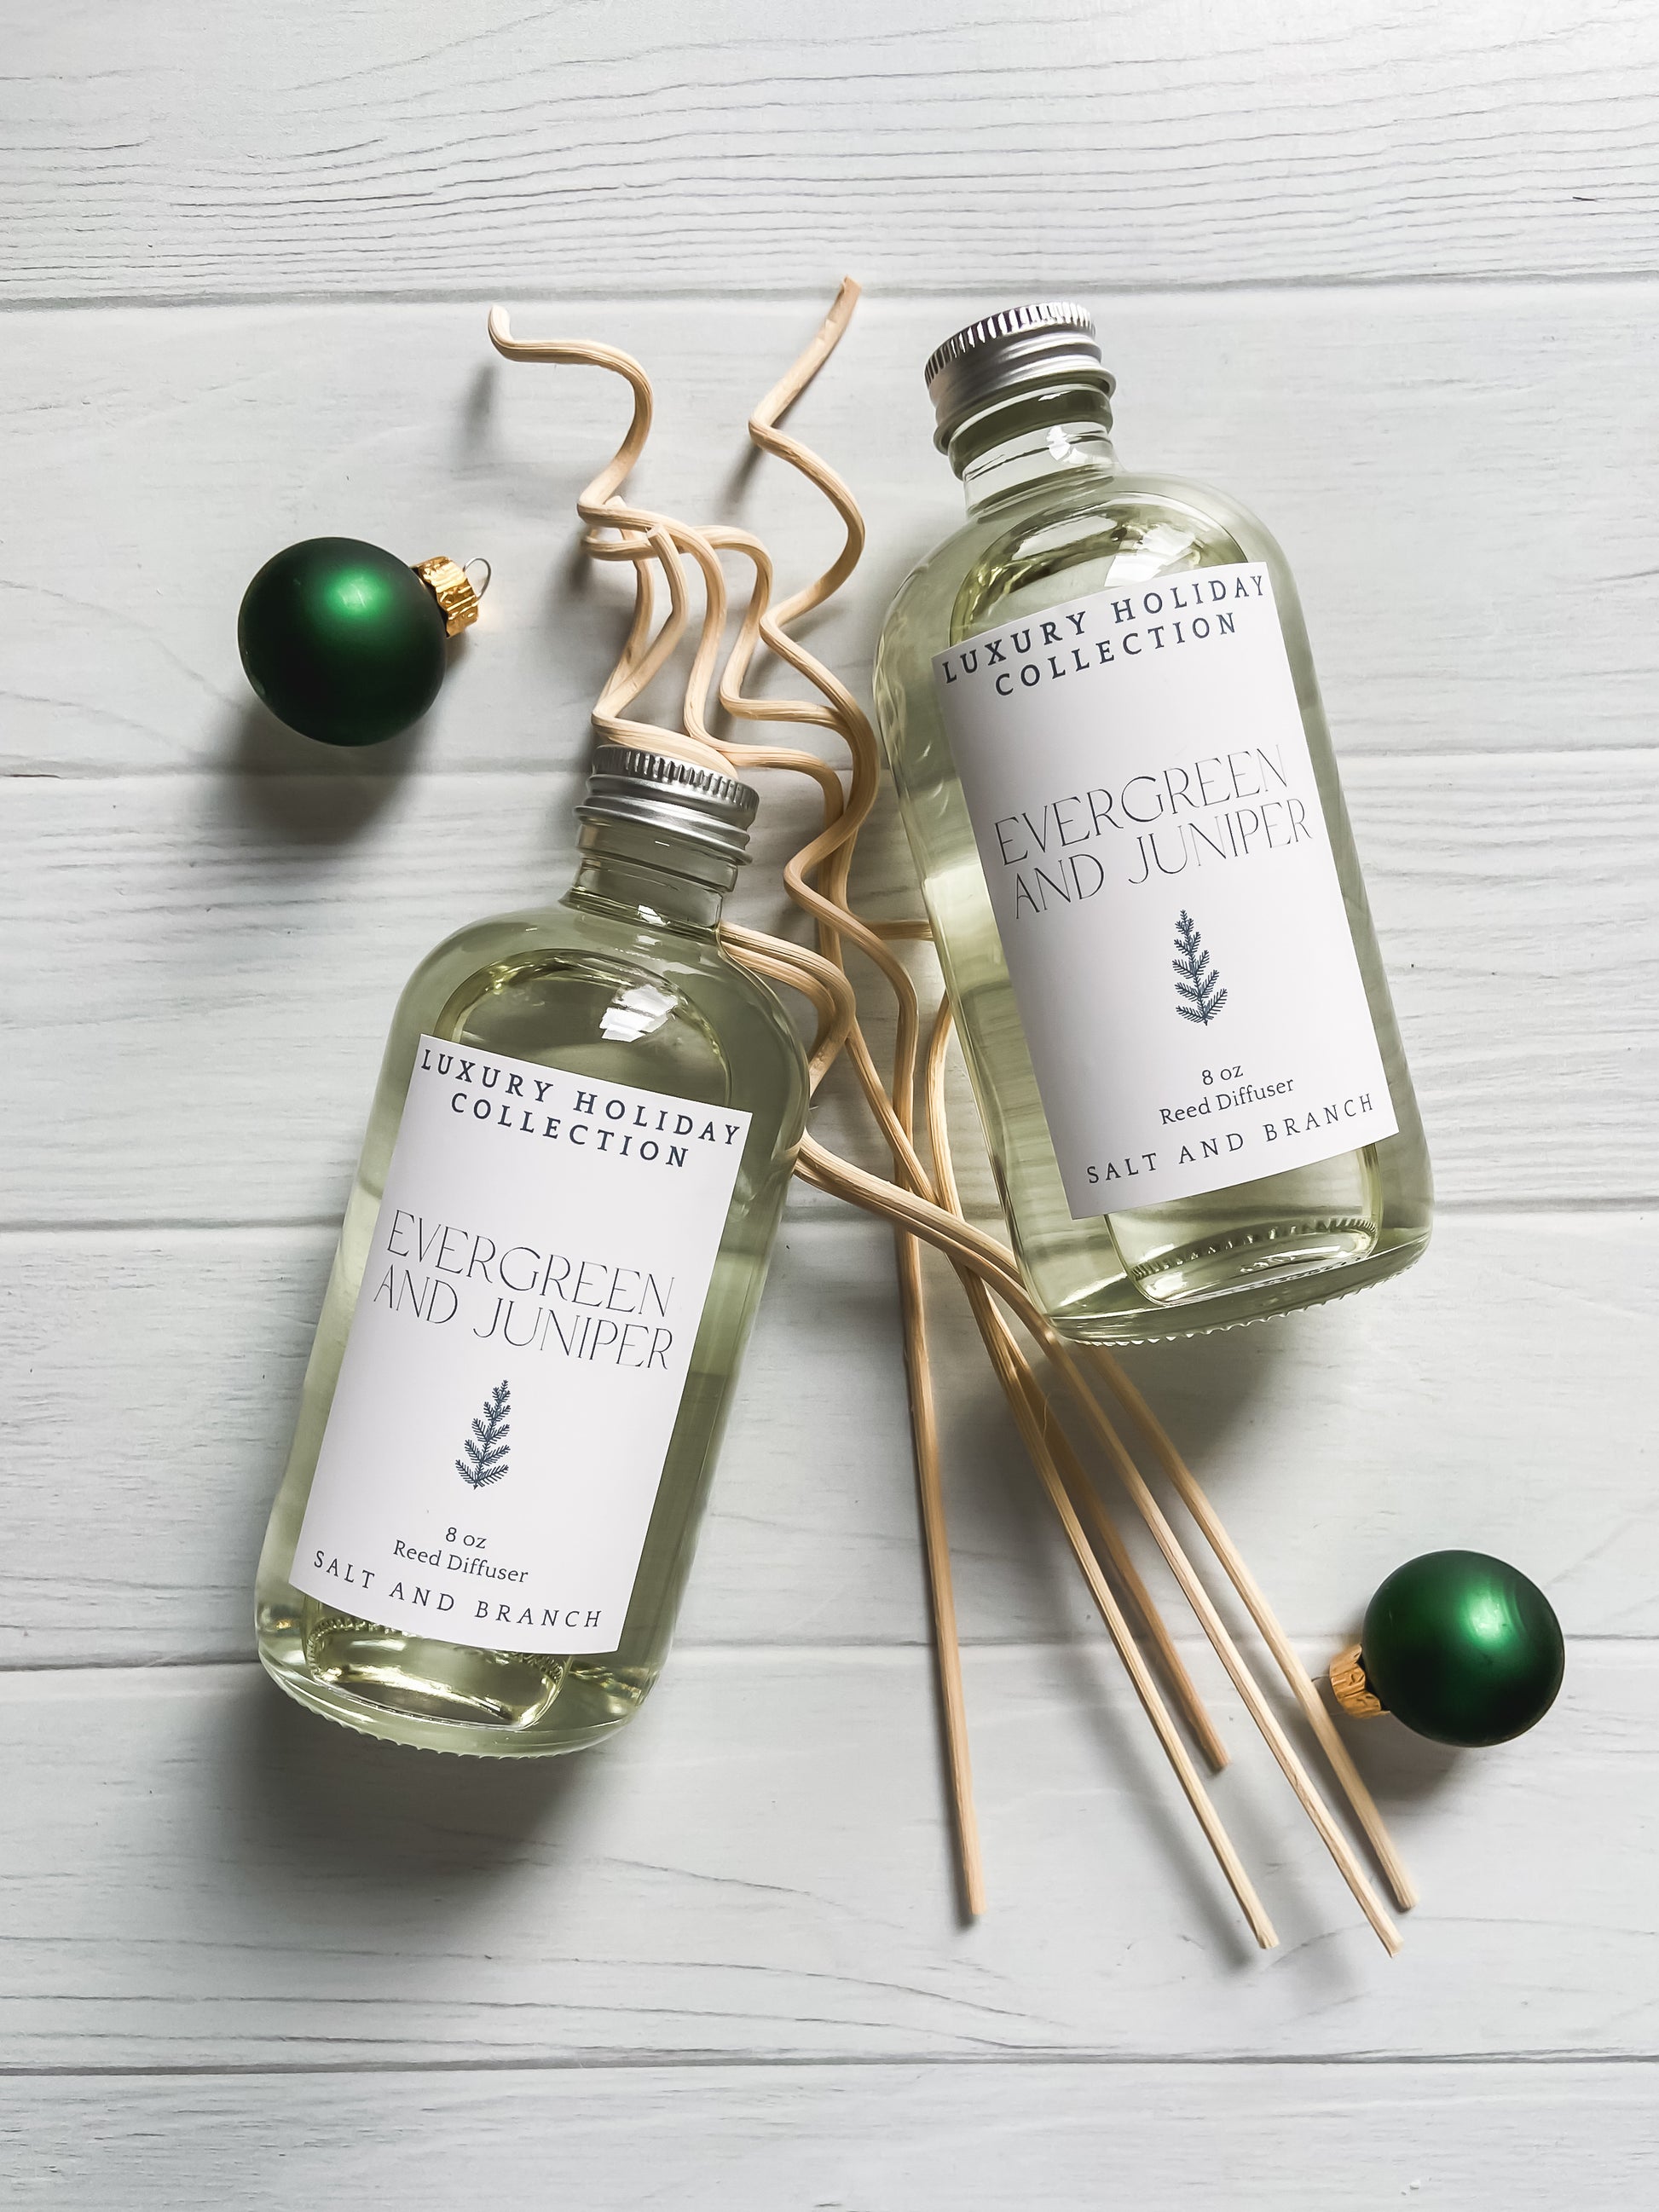 Evergreen and Juniper Reed Diffuser - Salt and Branch